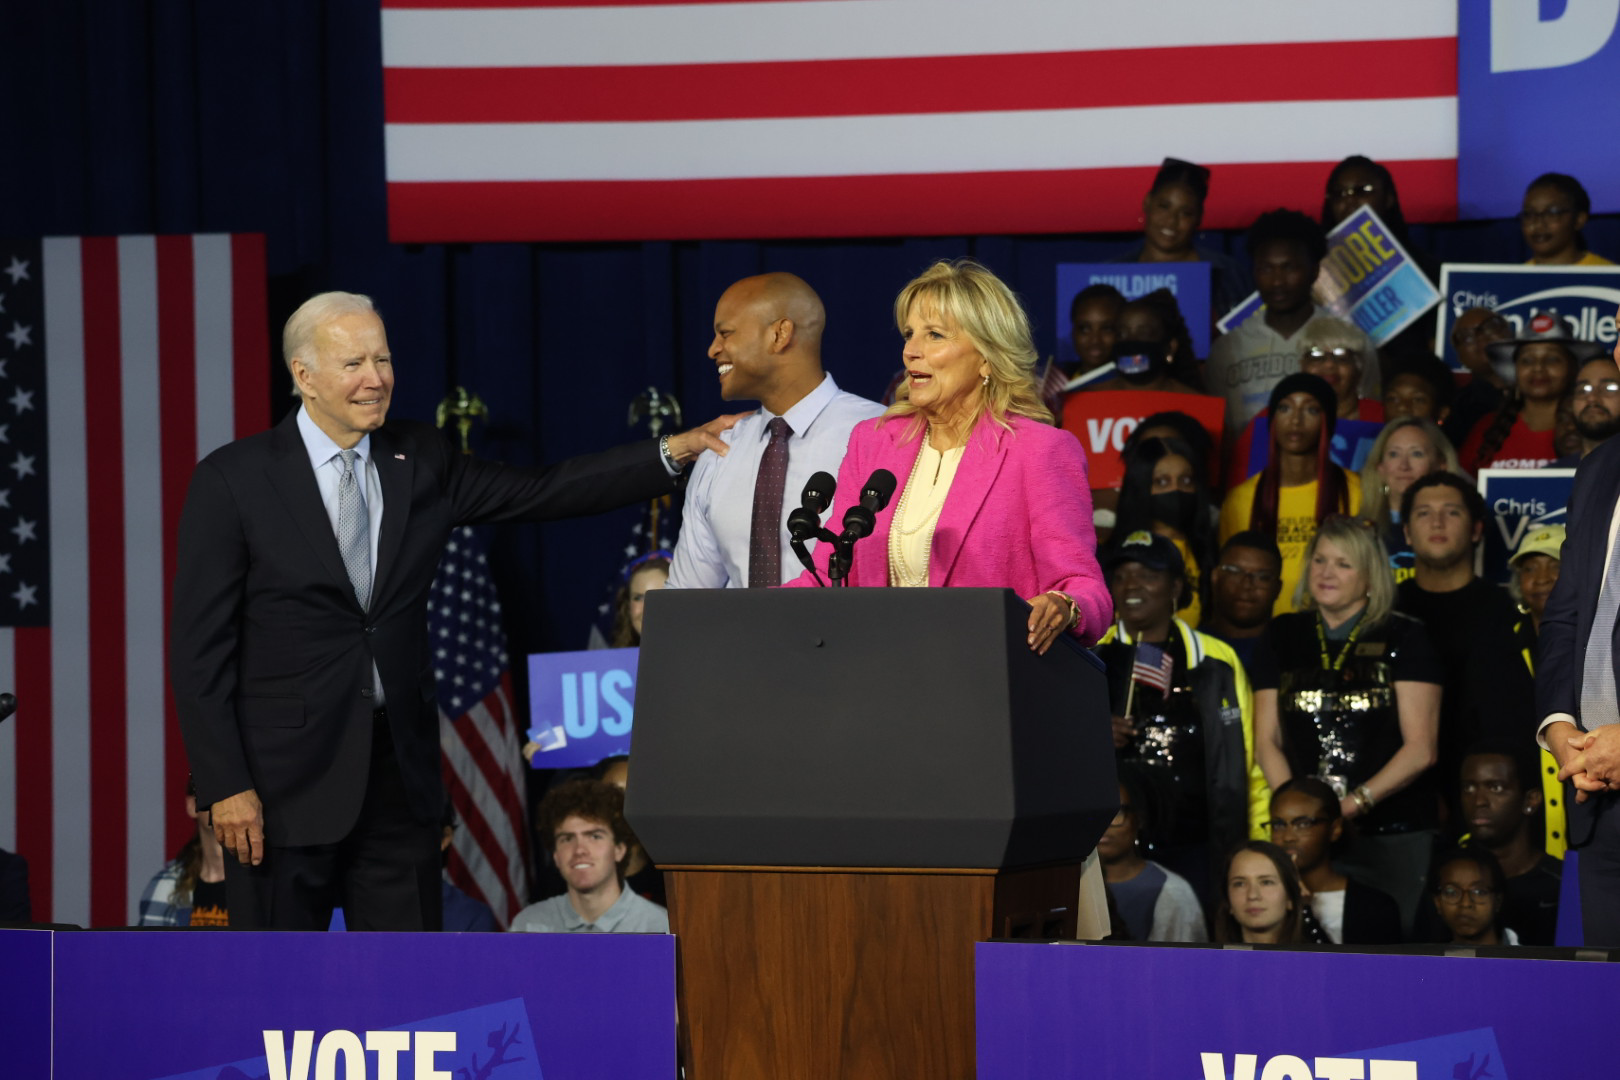 President Biden and Wes More Pump Up Voters at Rally on Election Eve